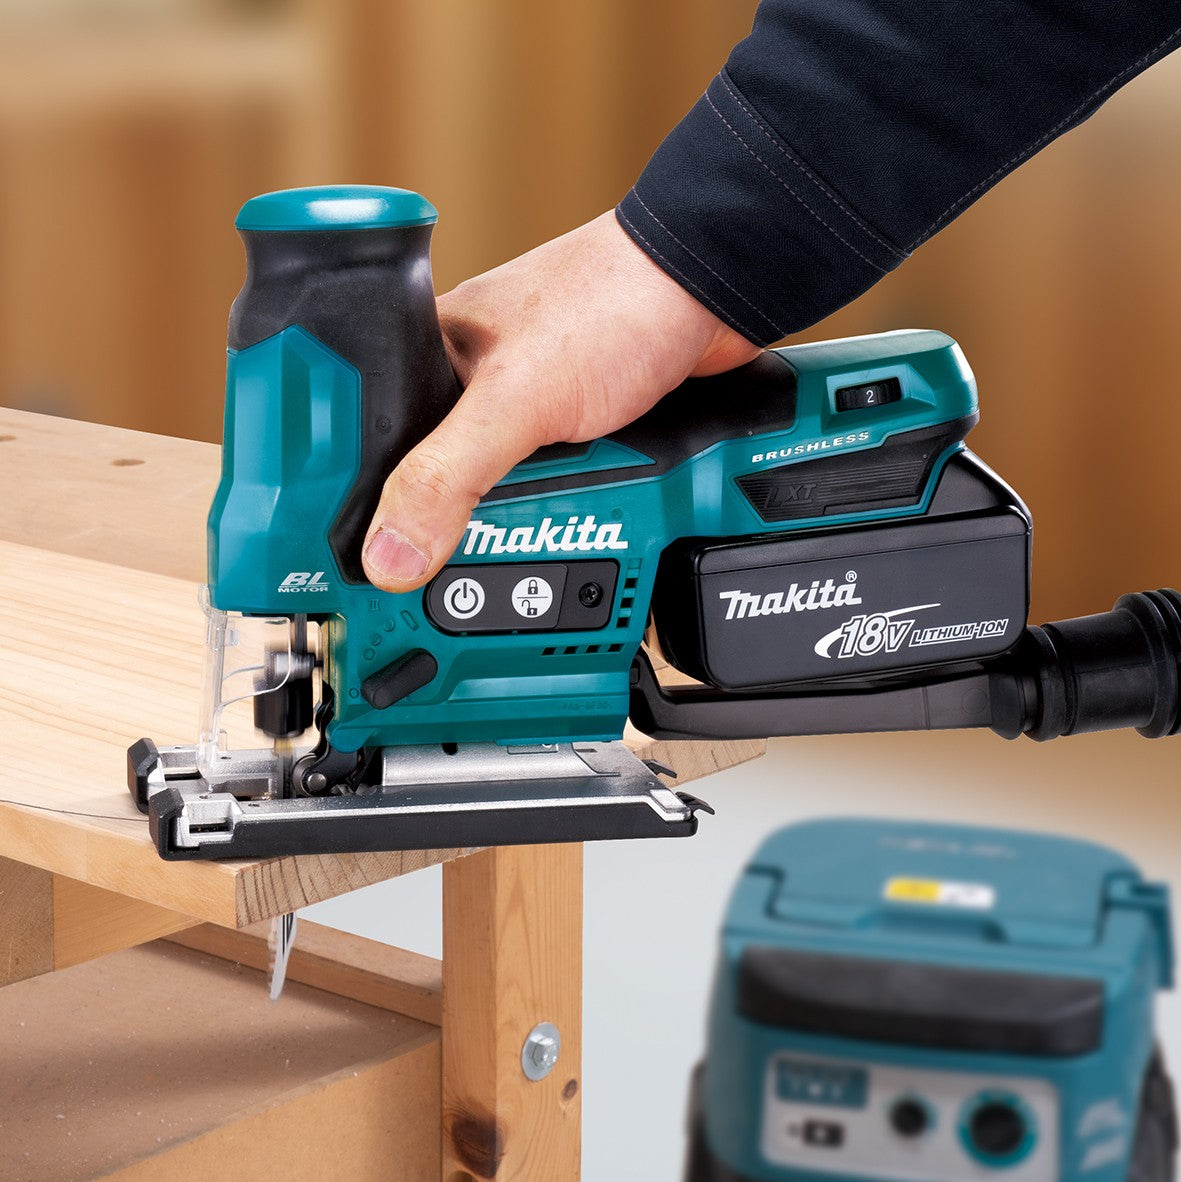 18V Brushless Compact Barrel Handle Jigsaw Bare (Tool Only) DJV185Z by Makita